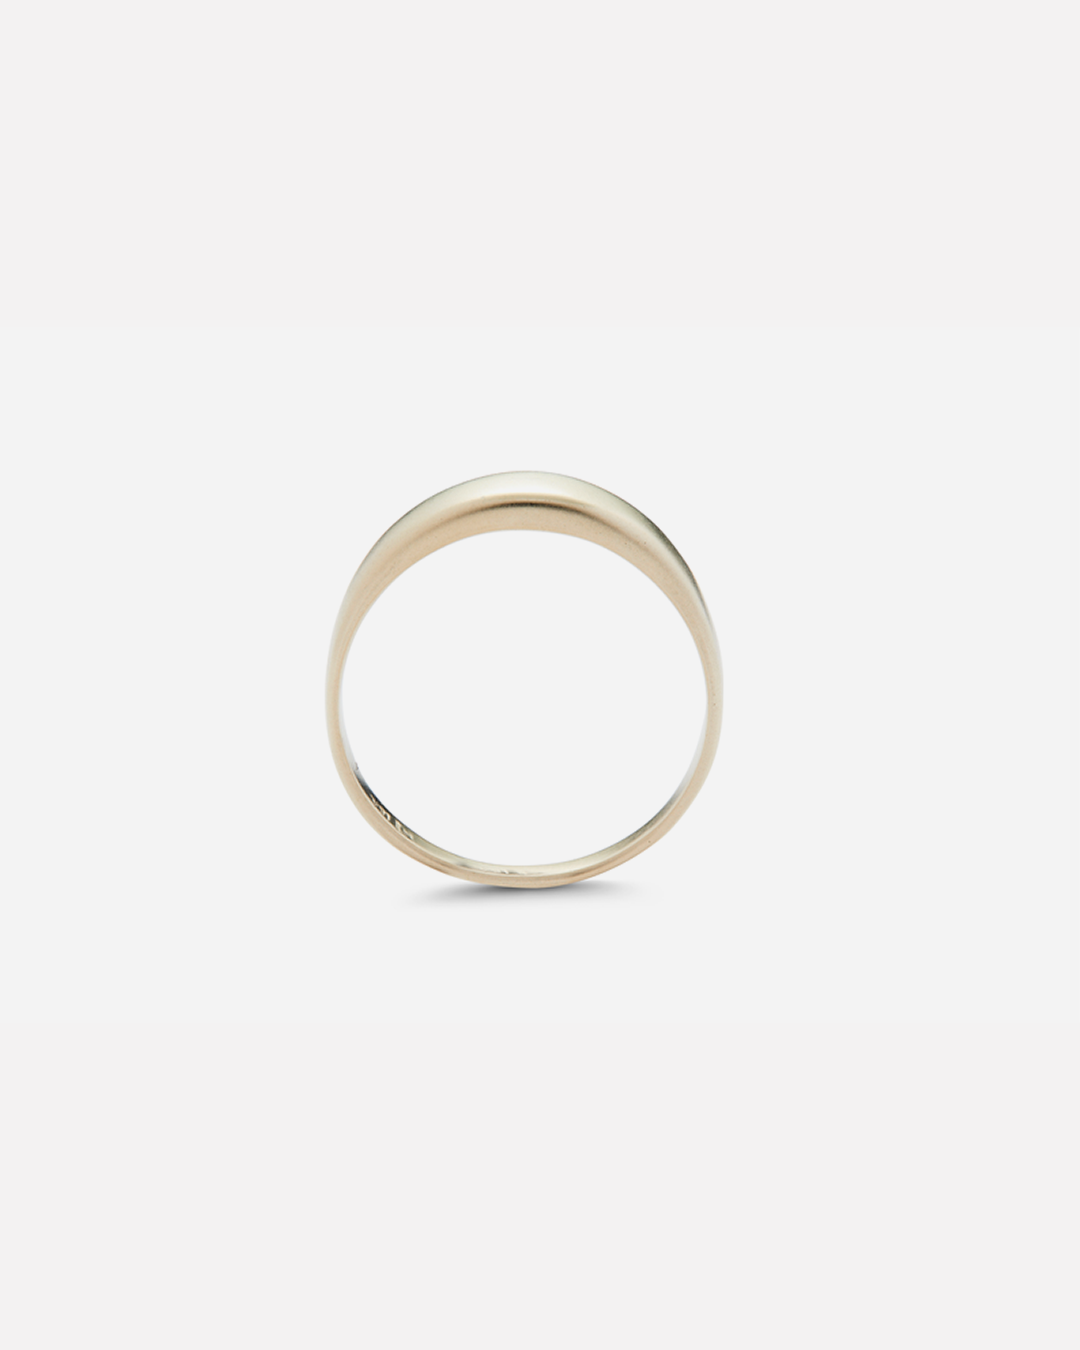 Moon Band / Large By Hiroyo in Wedding Bands Category